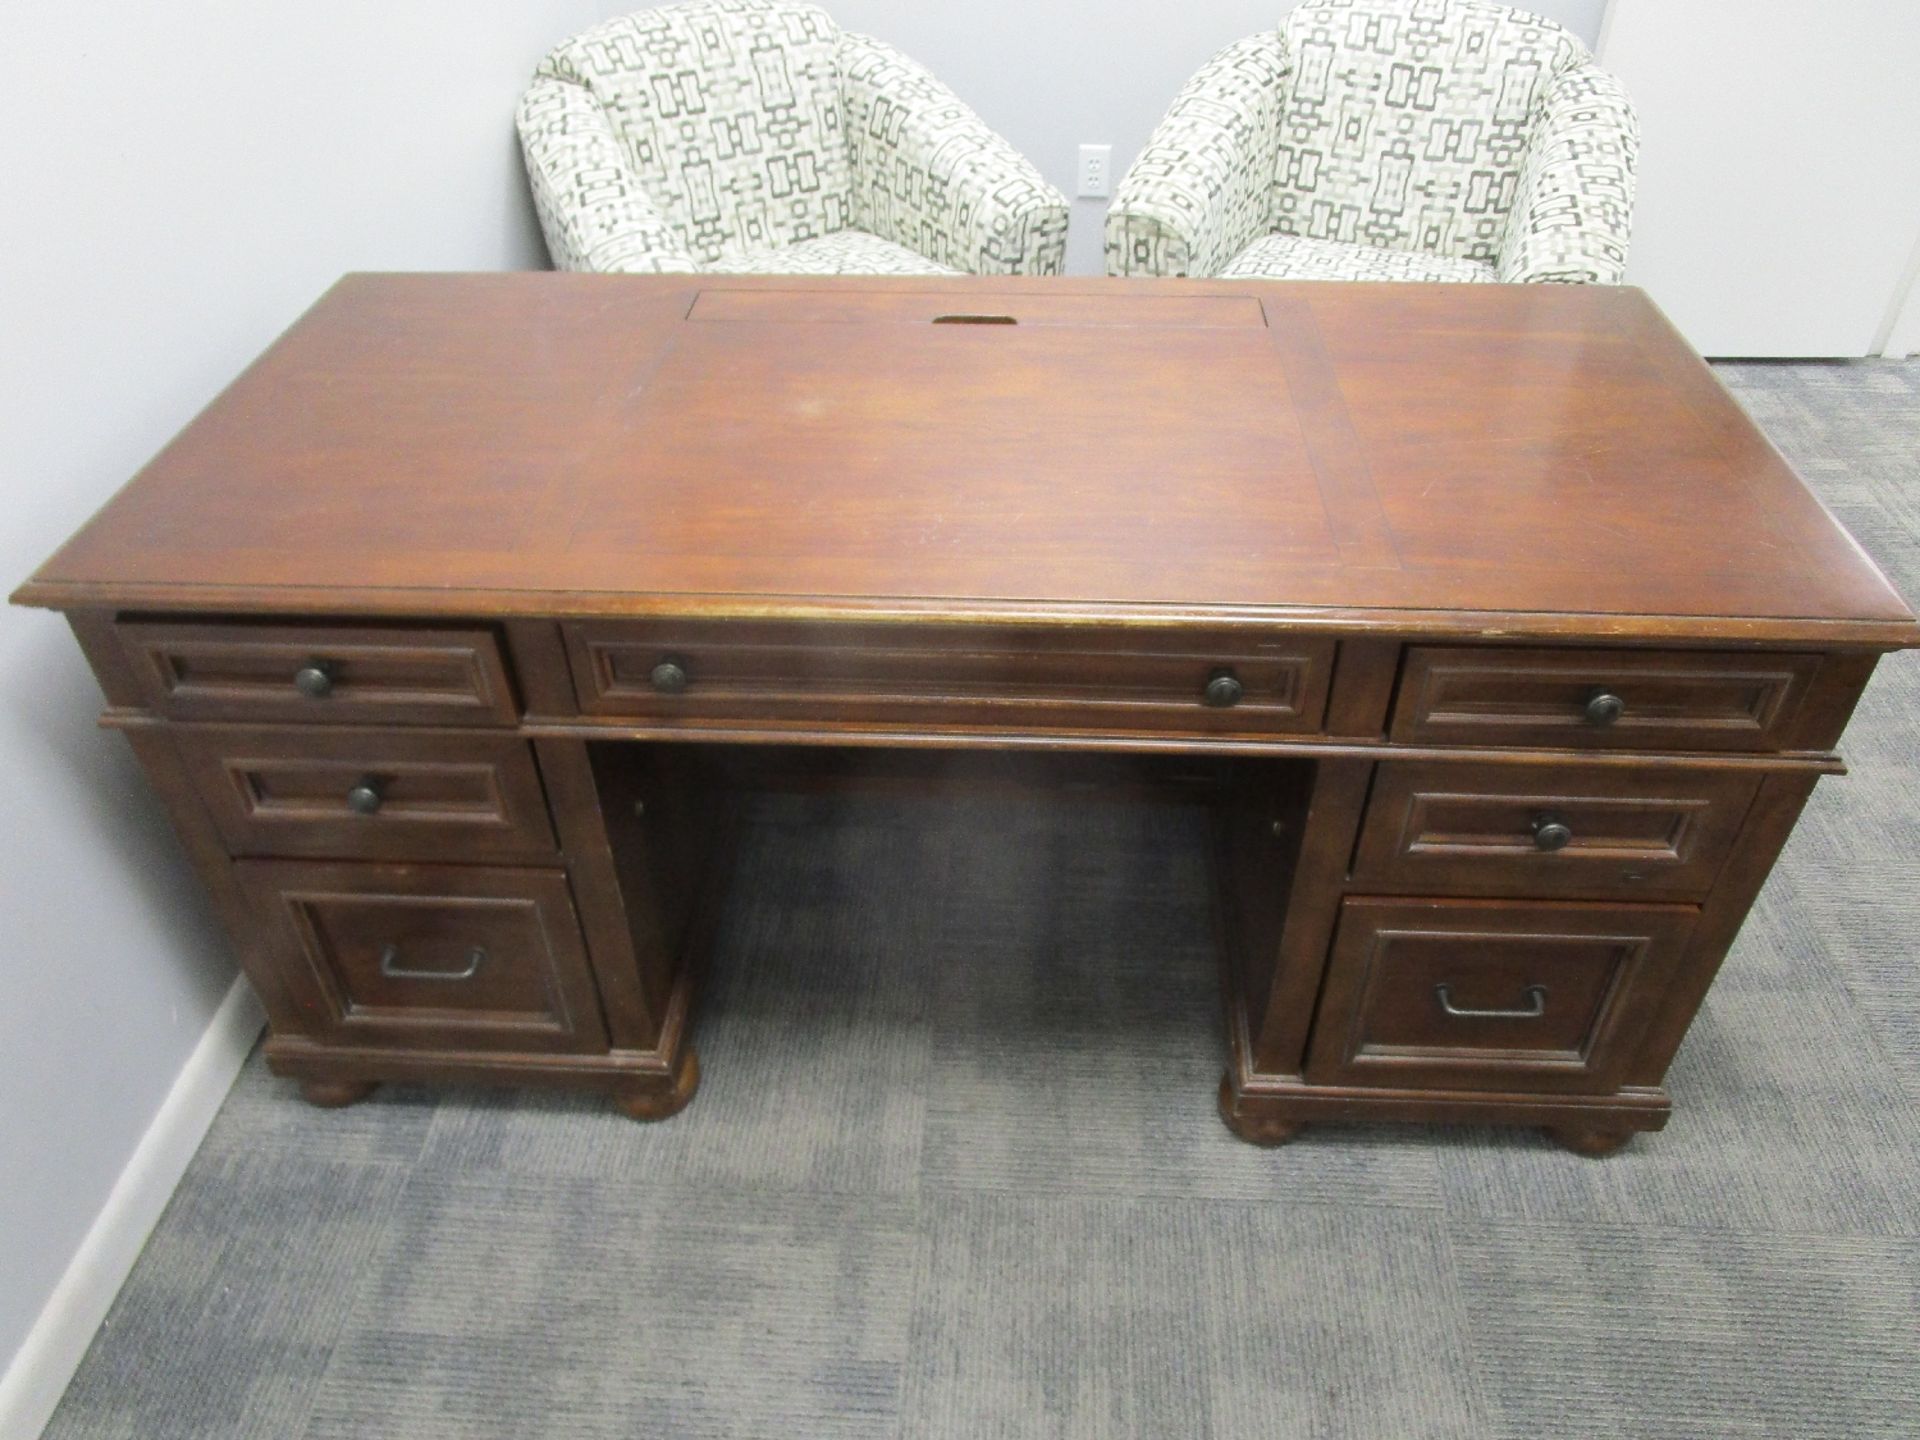 Lot of Executive Office Furniture - Image 4 of 5